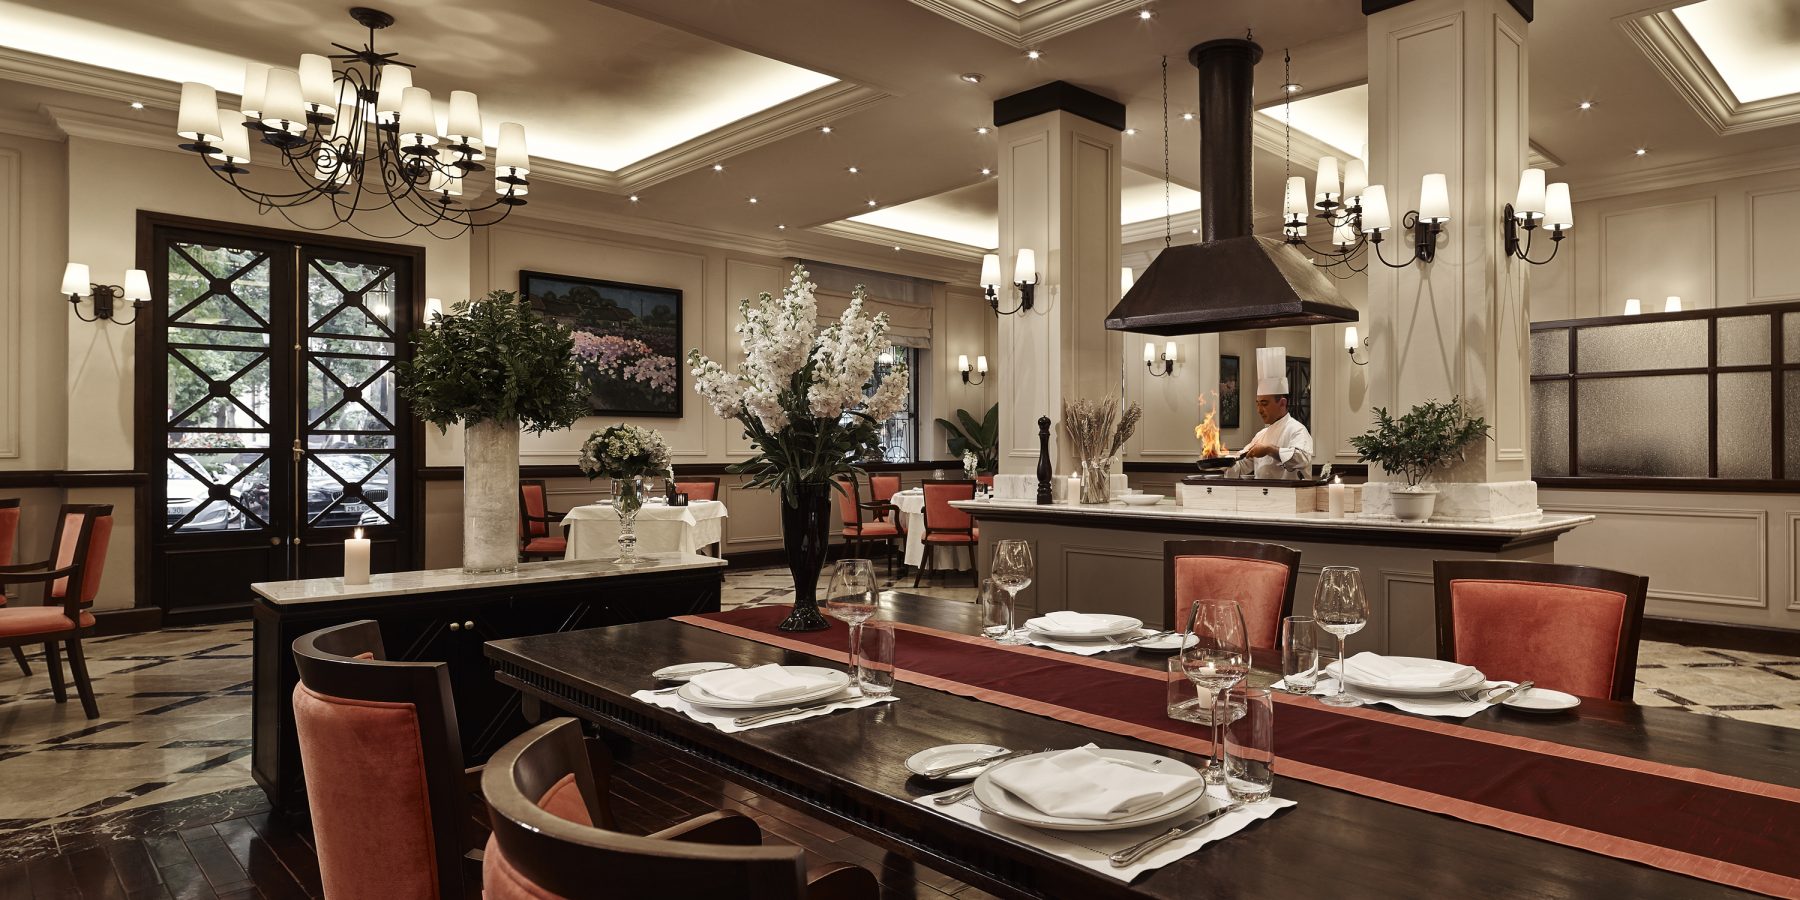 Le beaulieu, one of the most famous luxury restaurants in Hanoi